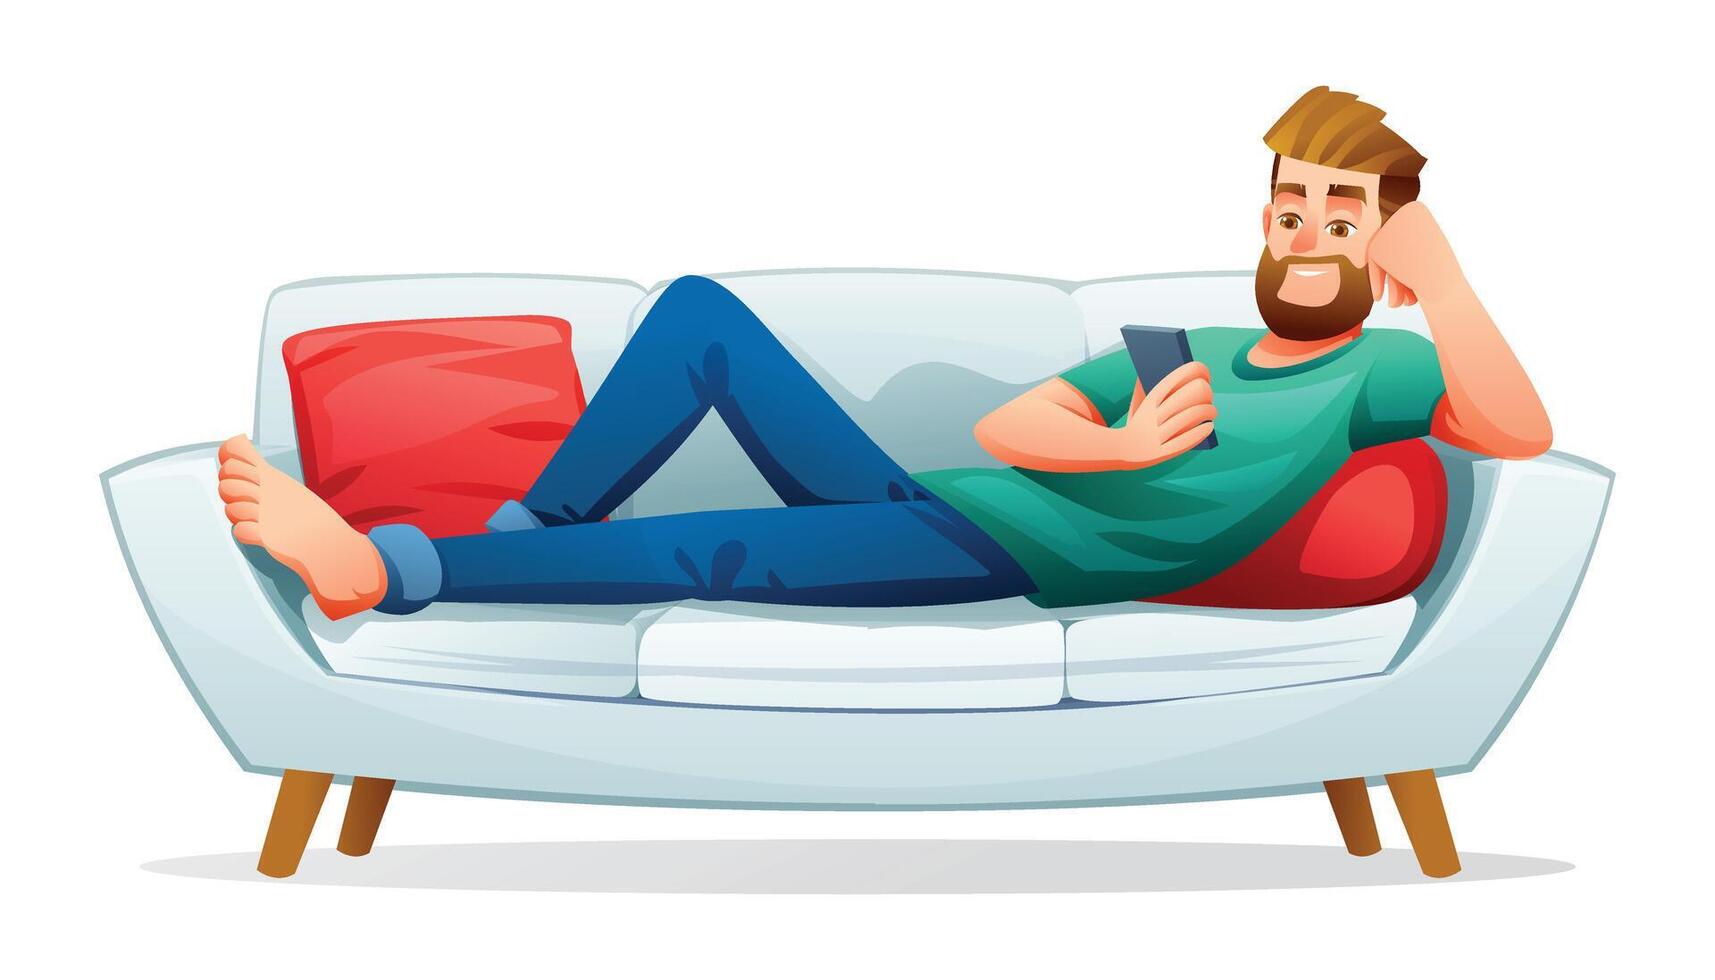 Man lying on the couch while using smartphone. illustration isolated on white background vector